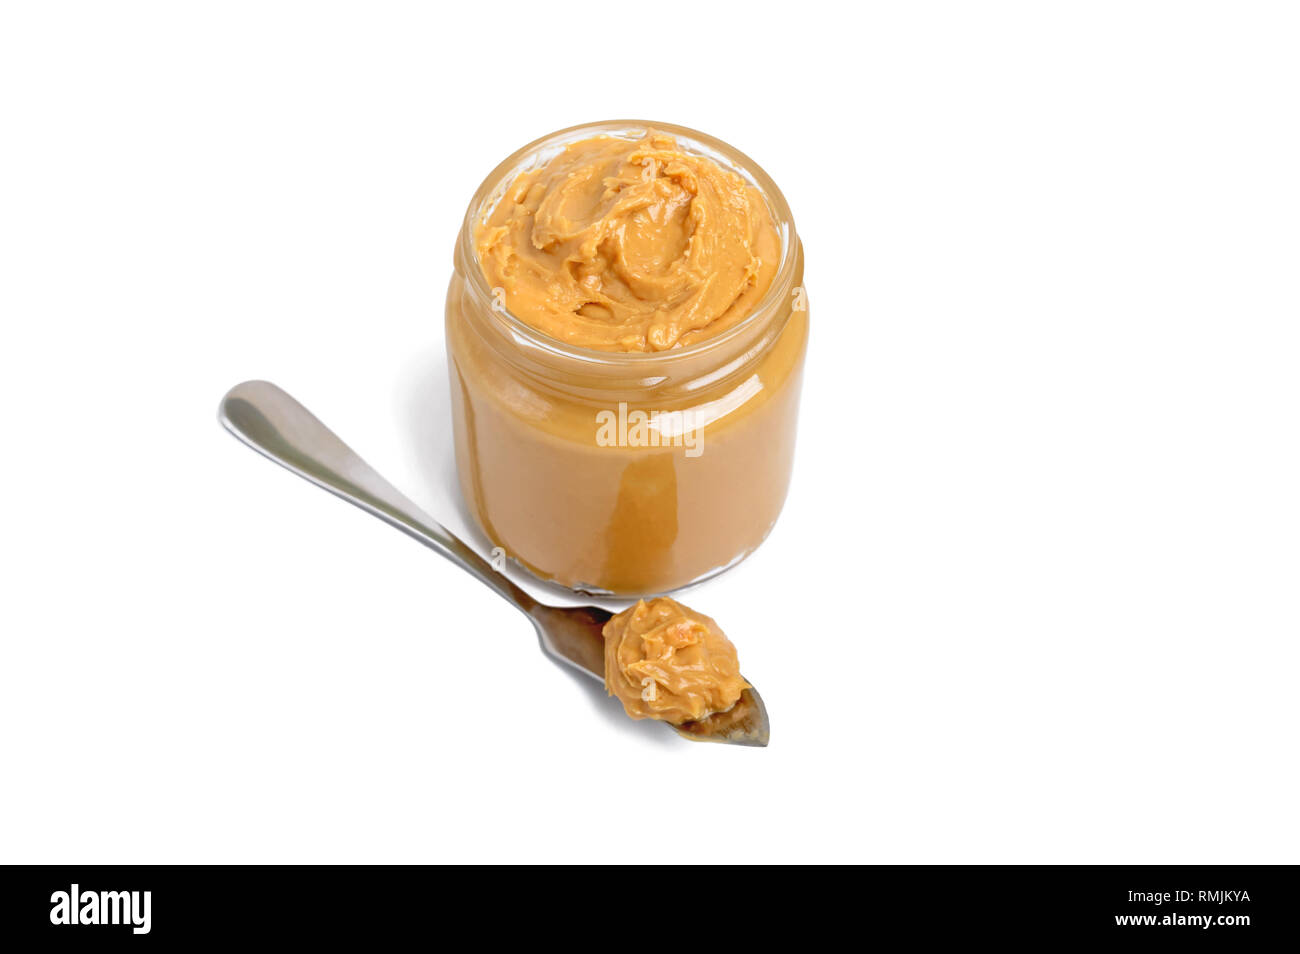 https://c8.alamy.com/comp/RMJKYA/peanut-butter-in-a-glass-jar-isolated-on-white-background-a-traditional-product-of-american-cuisine-RMJKYA.jpg